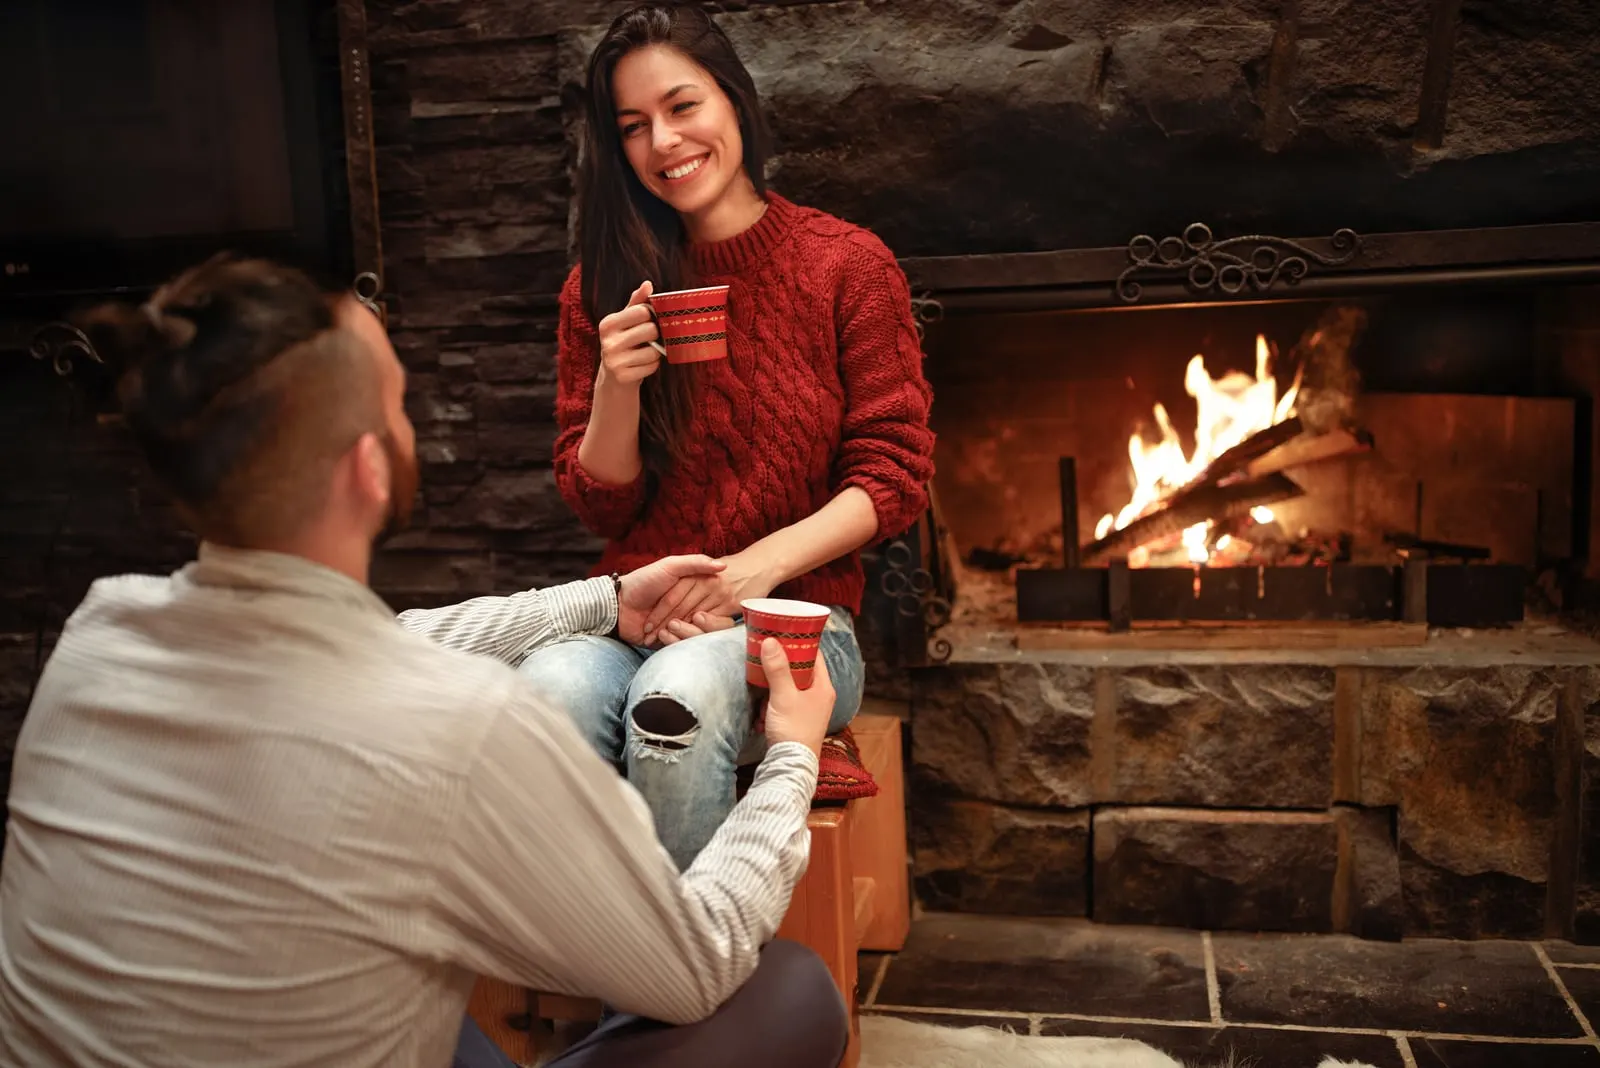 the man holds the woman's hand as they sit by the fire